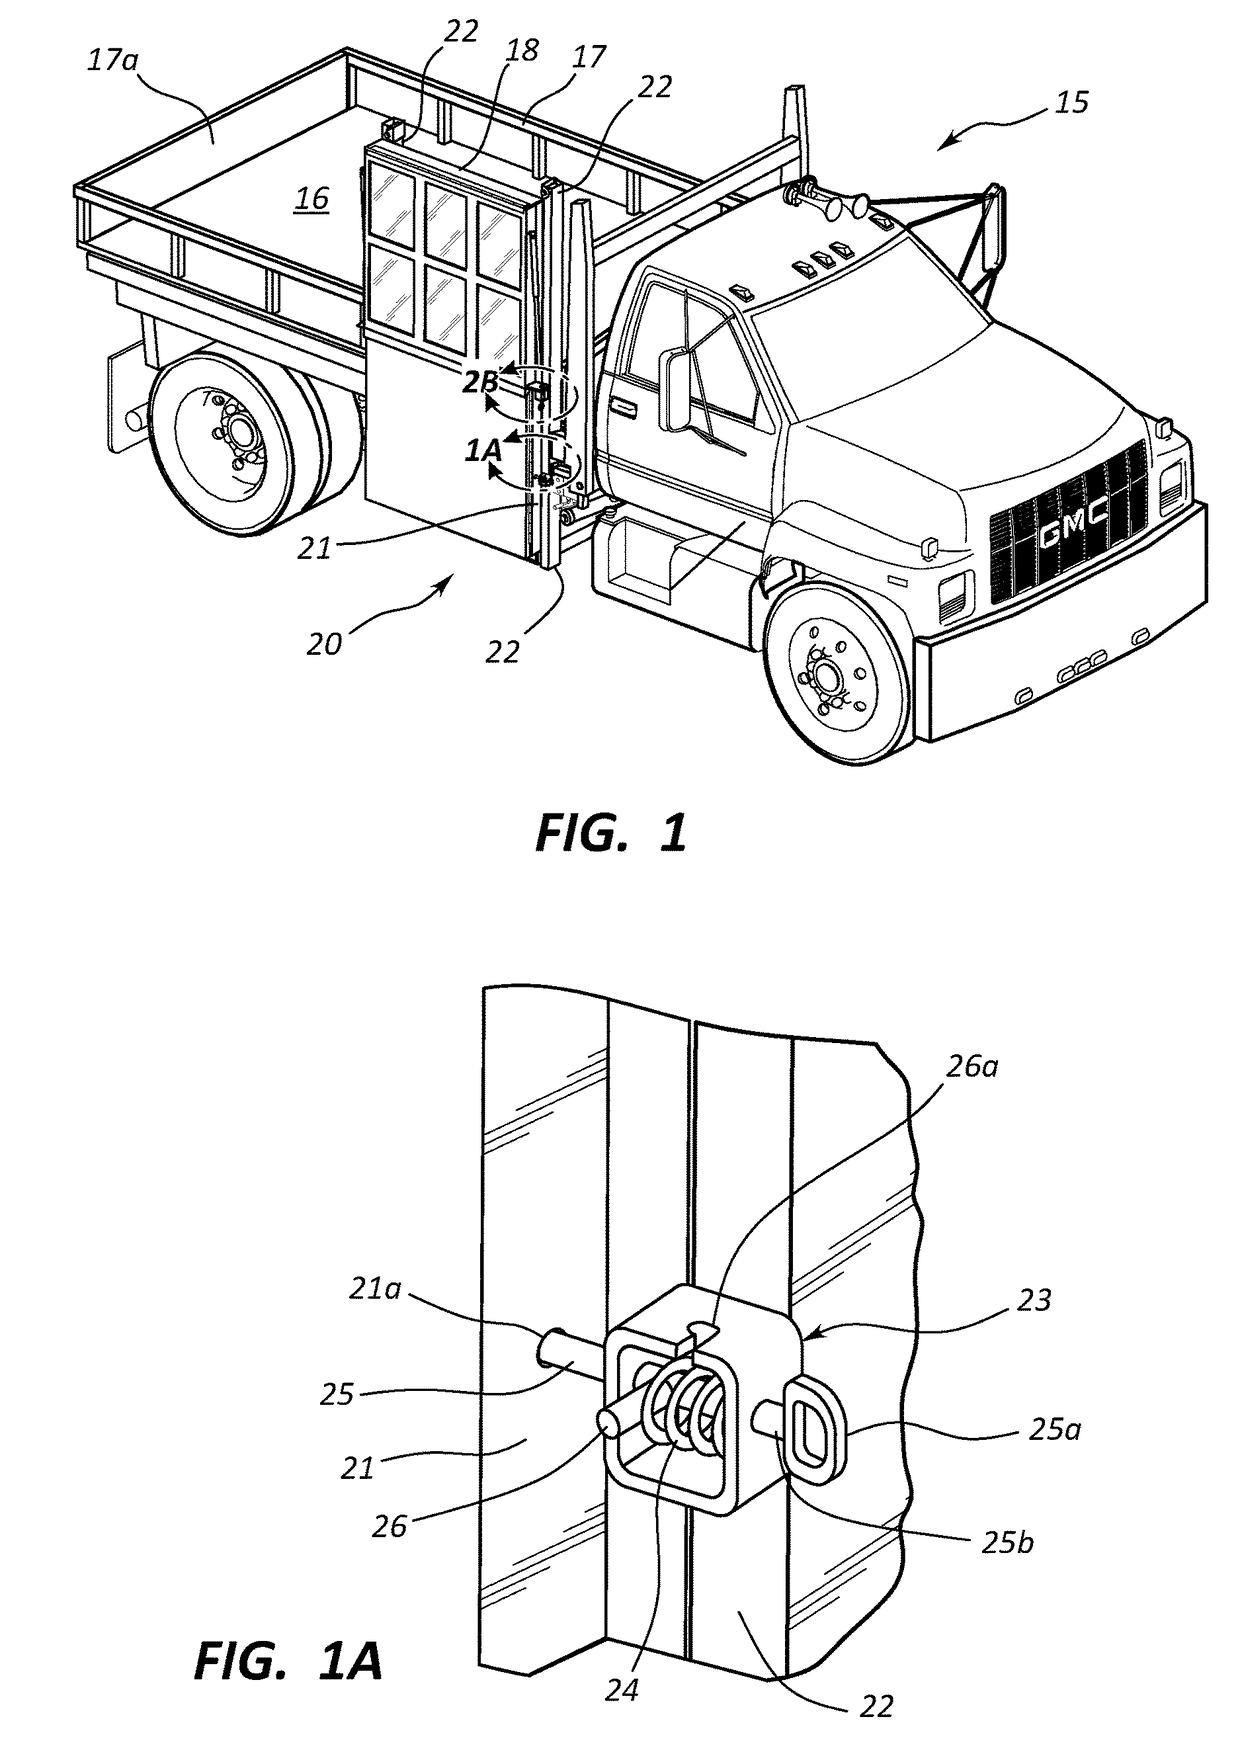 Portable private panel toilet system and method